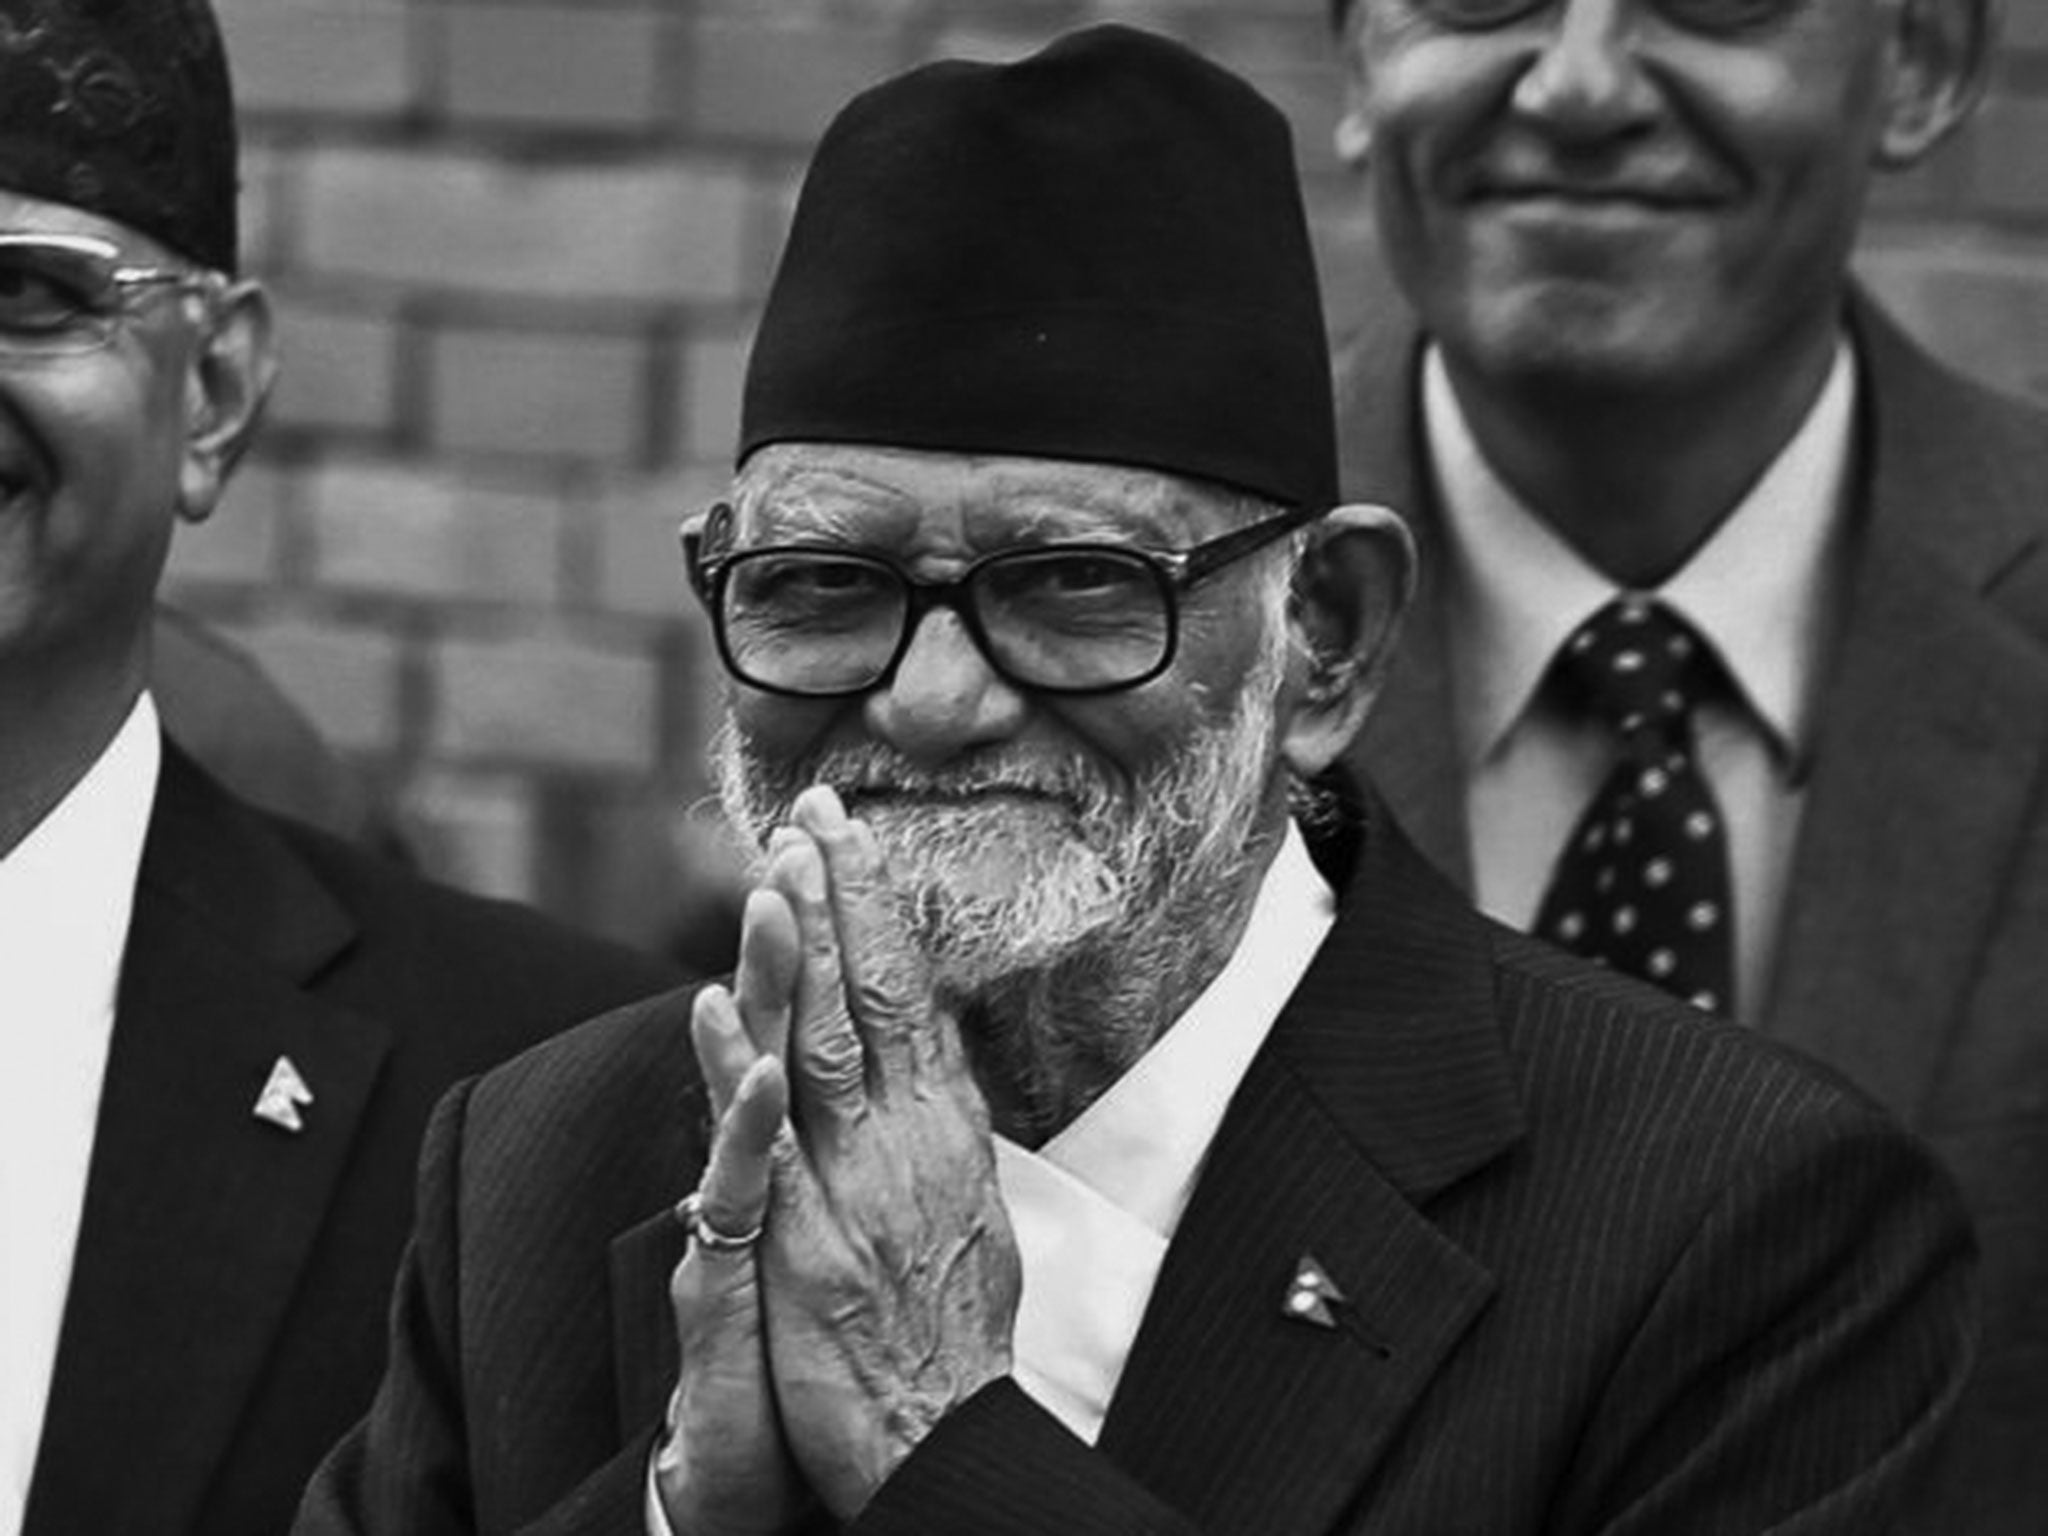 Koirala: he spent 15 years in exile in India because of his opposition to the no-party system